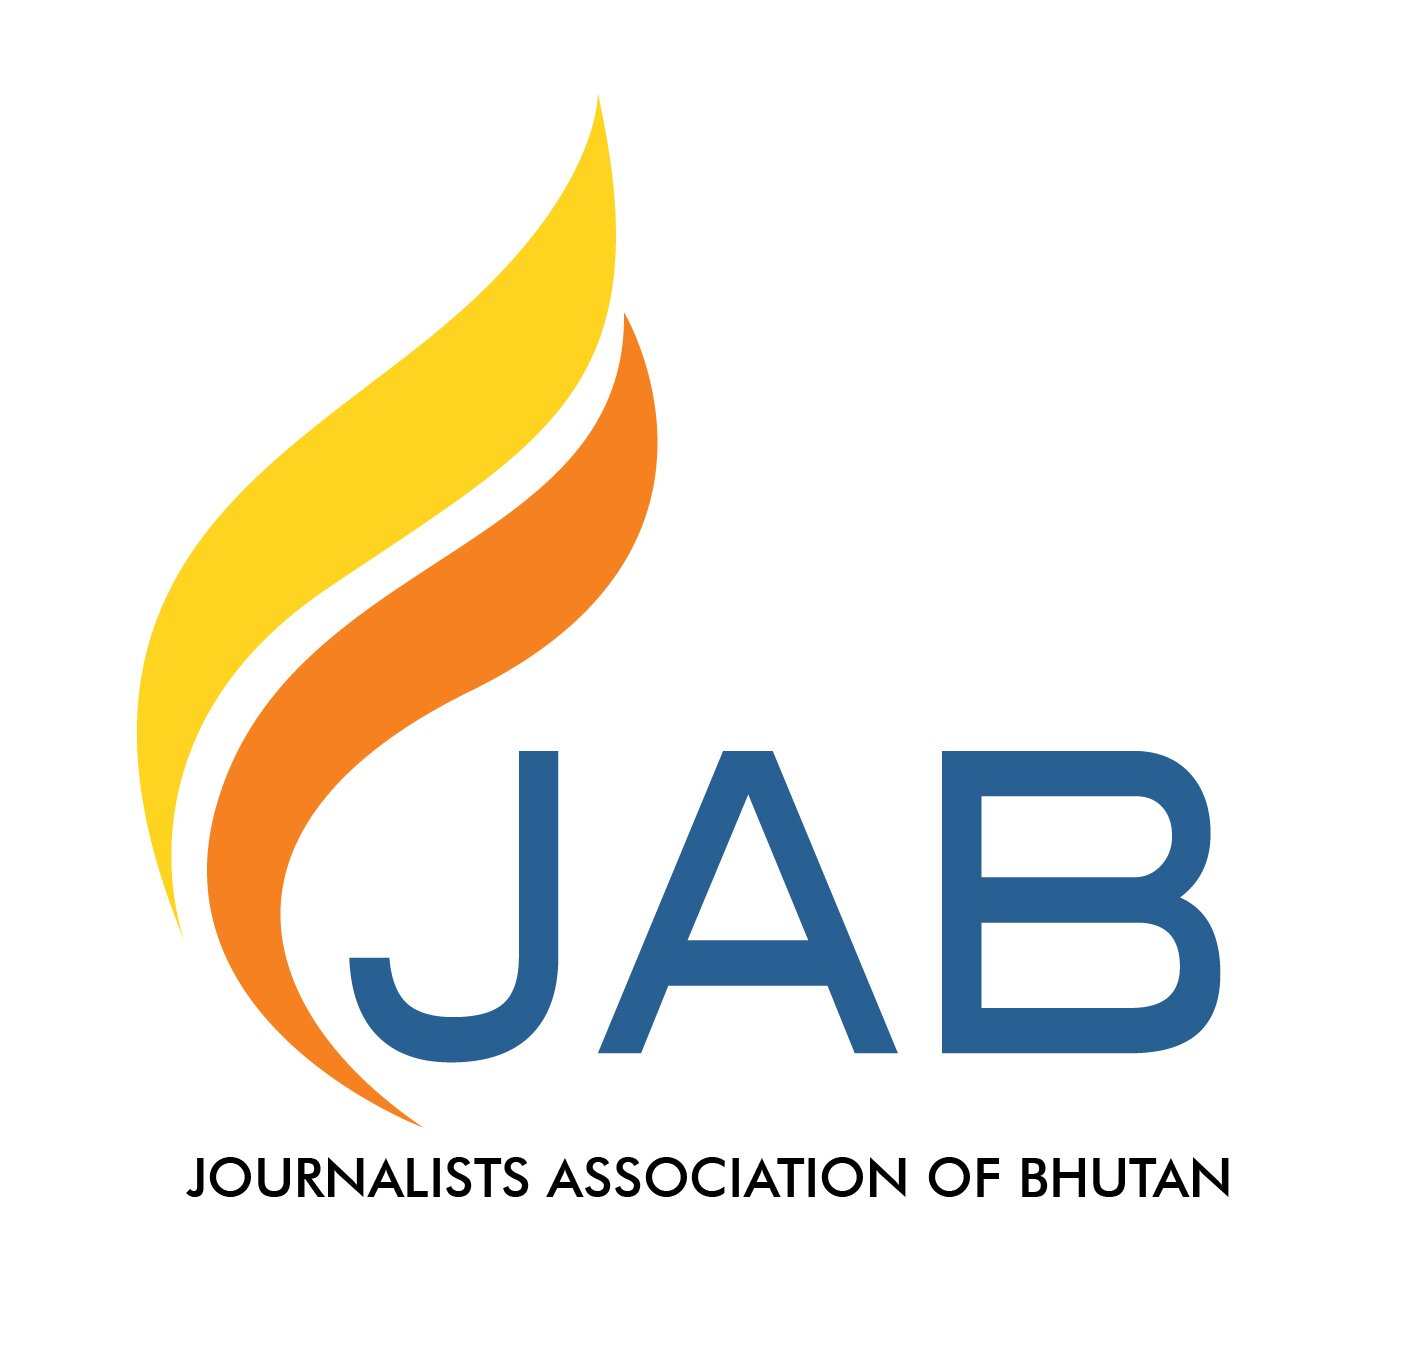 An association of, by and for the journalists of Bhutan